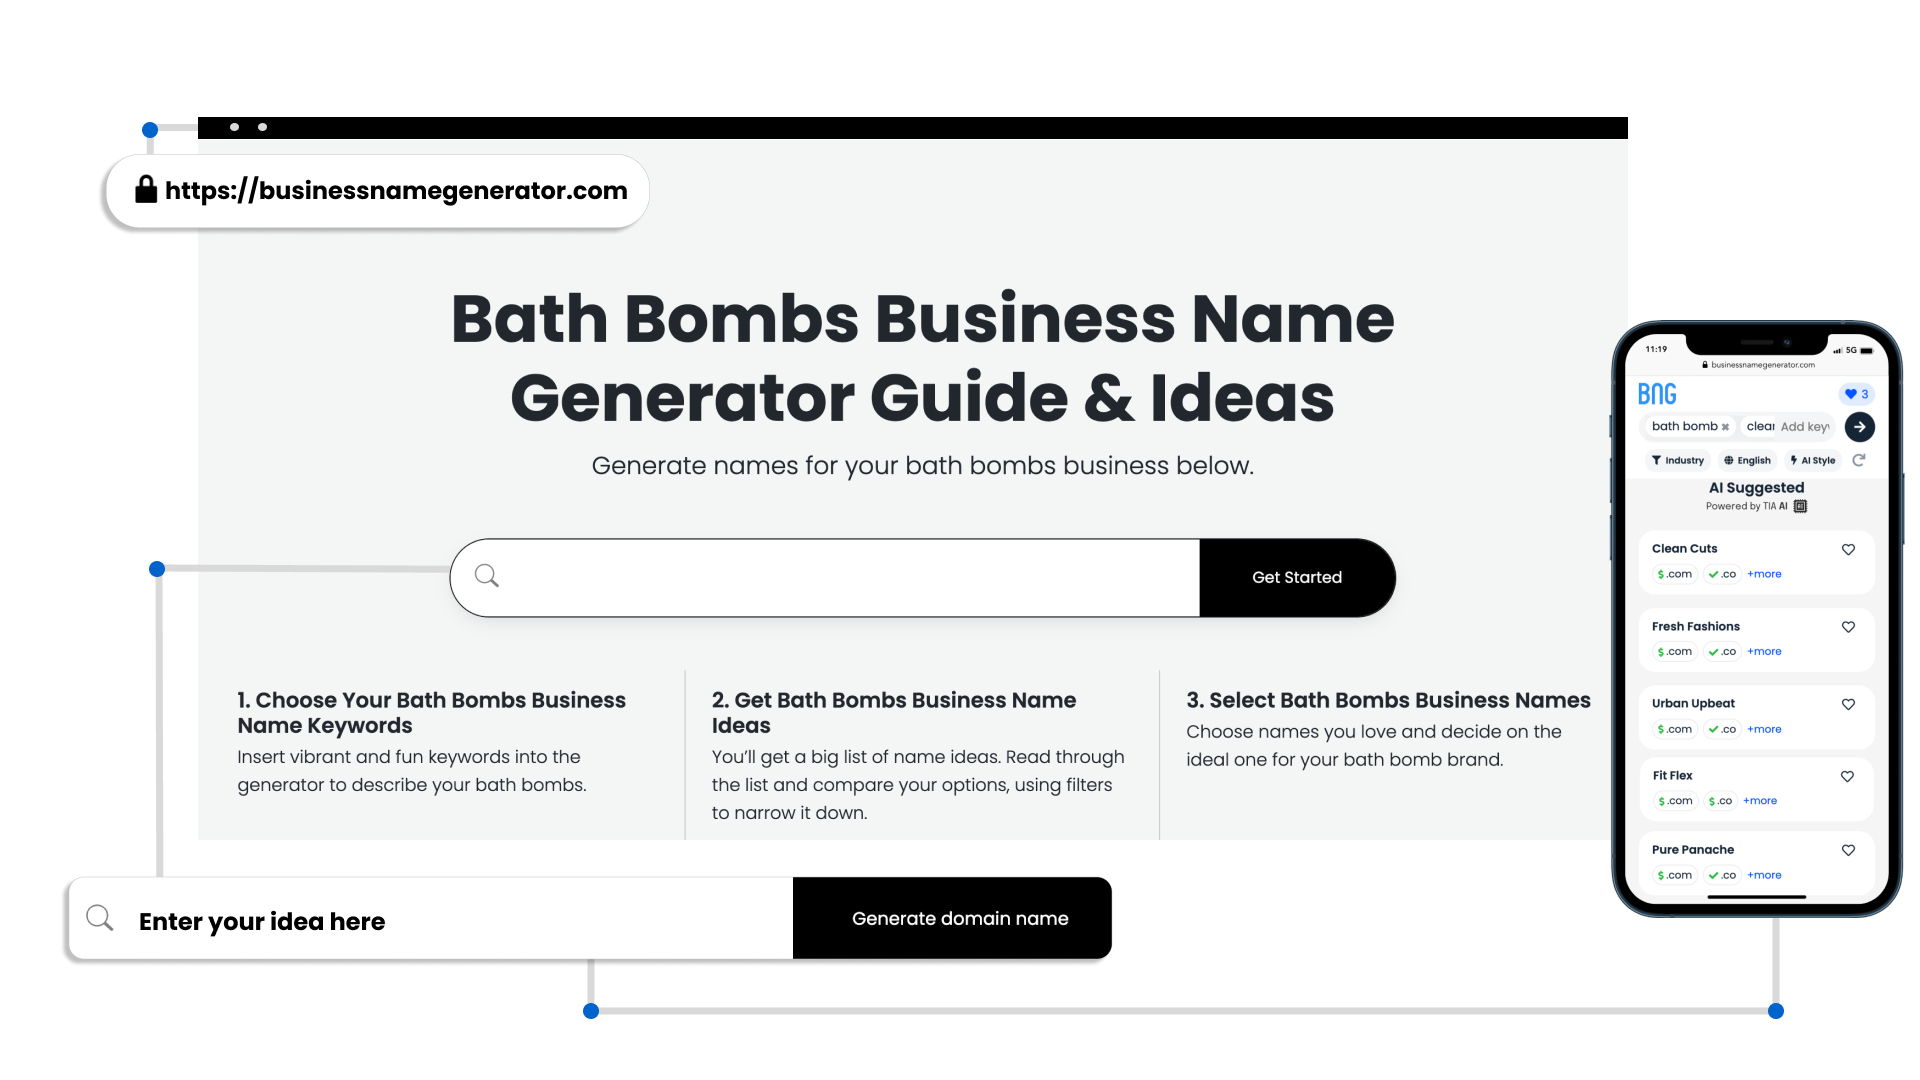 How to use our Bath Bombs Business Name Generator